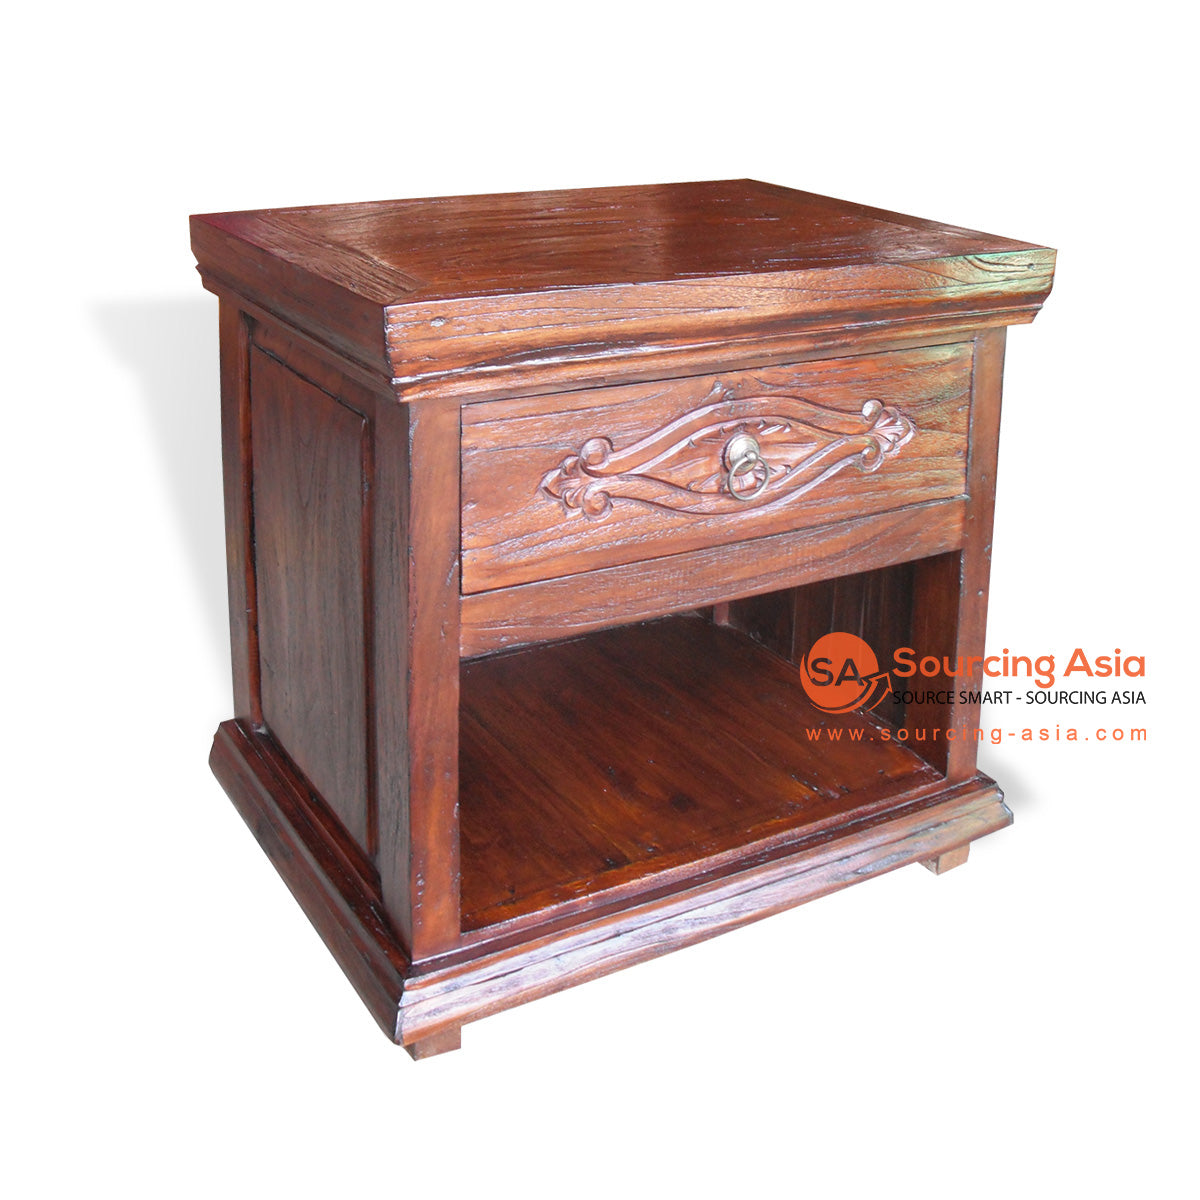 KYT50018 BROWN RECYCLED TEAK WOOD ONE OPEN SHELF AND DRAWER CARVED SIDE TABLE